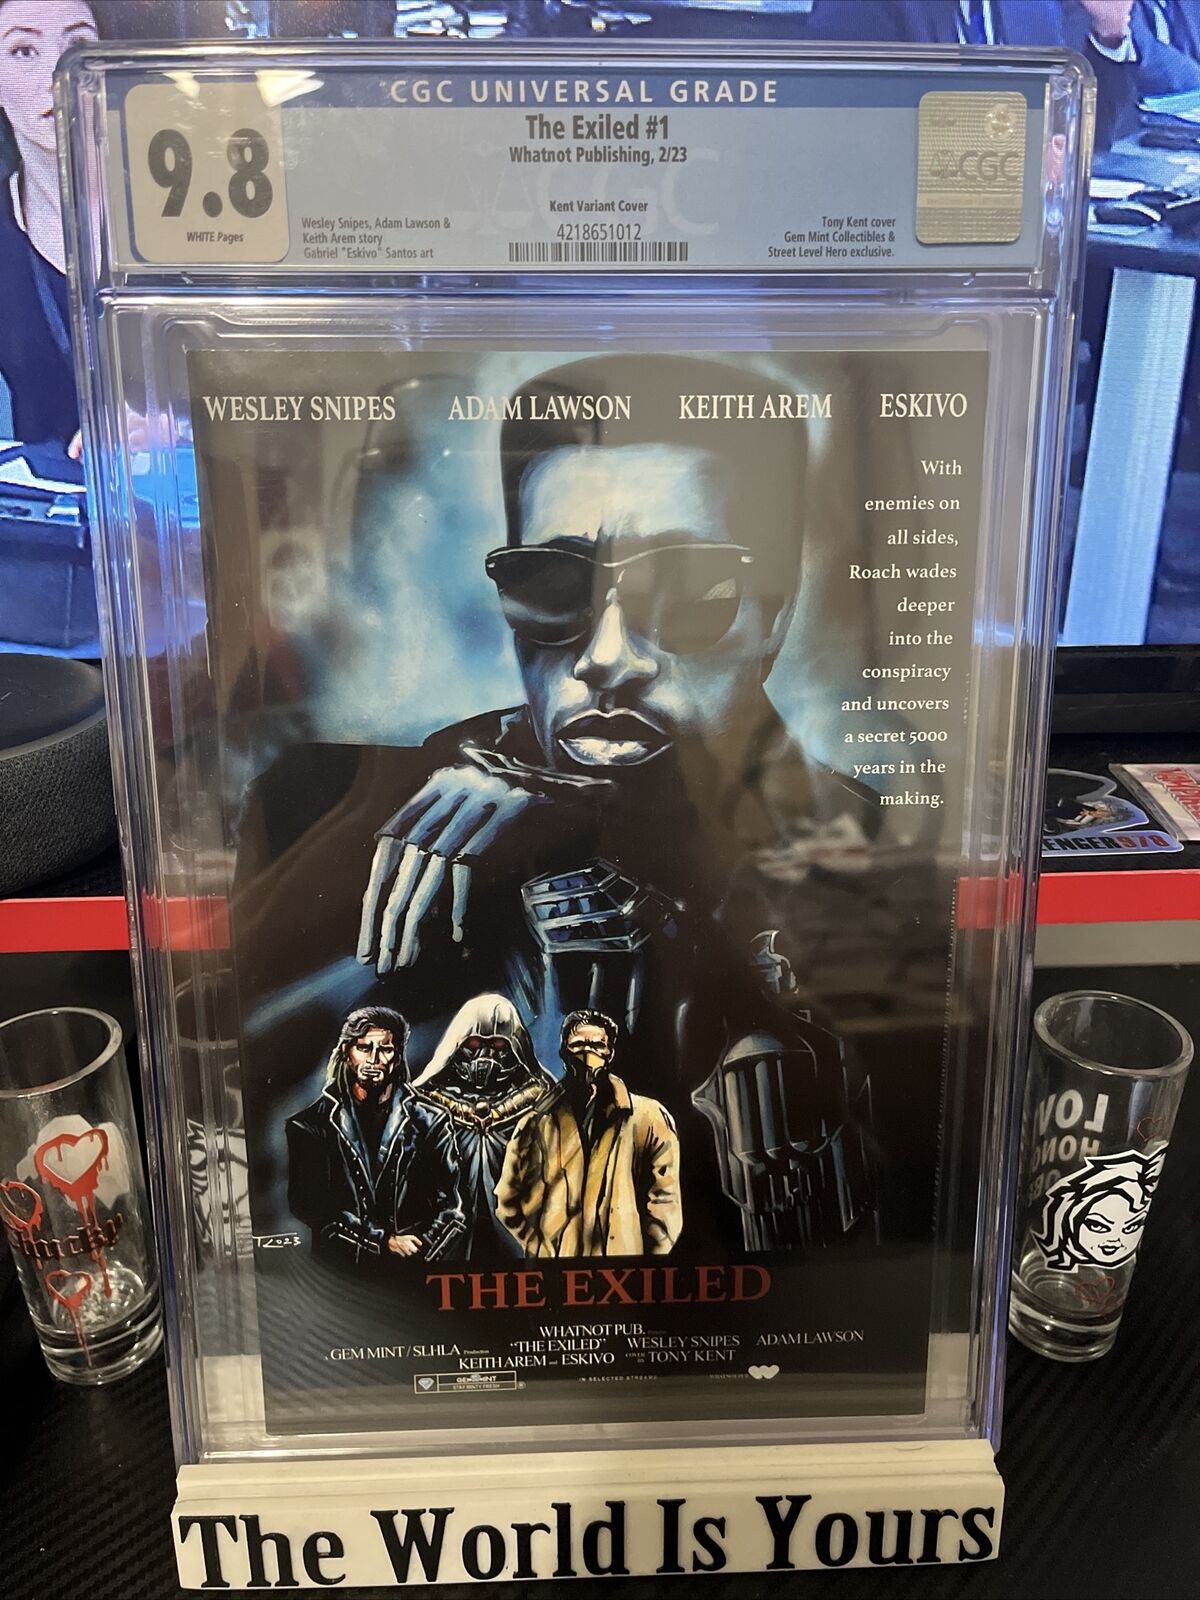 The Exiled #1 Wesley Snipes New Jack City Movie Variant ⛓️ Cgc 9.8, 1 On Census